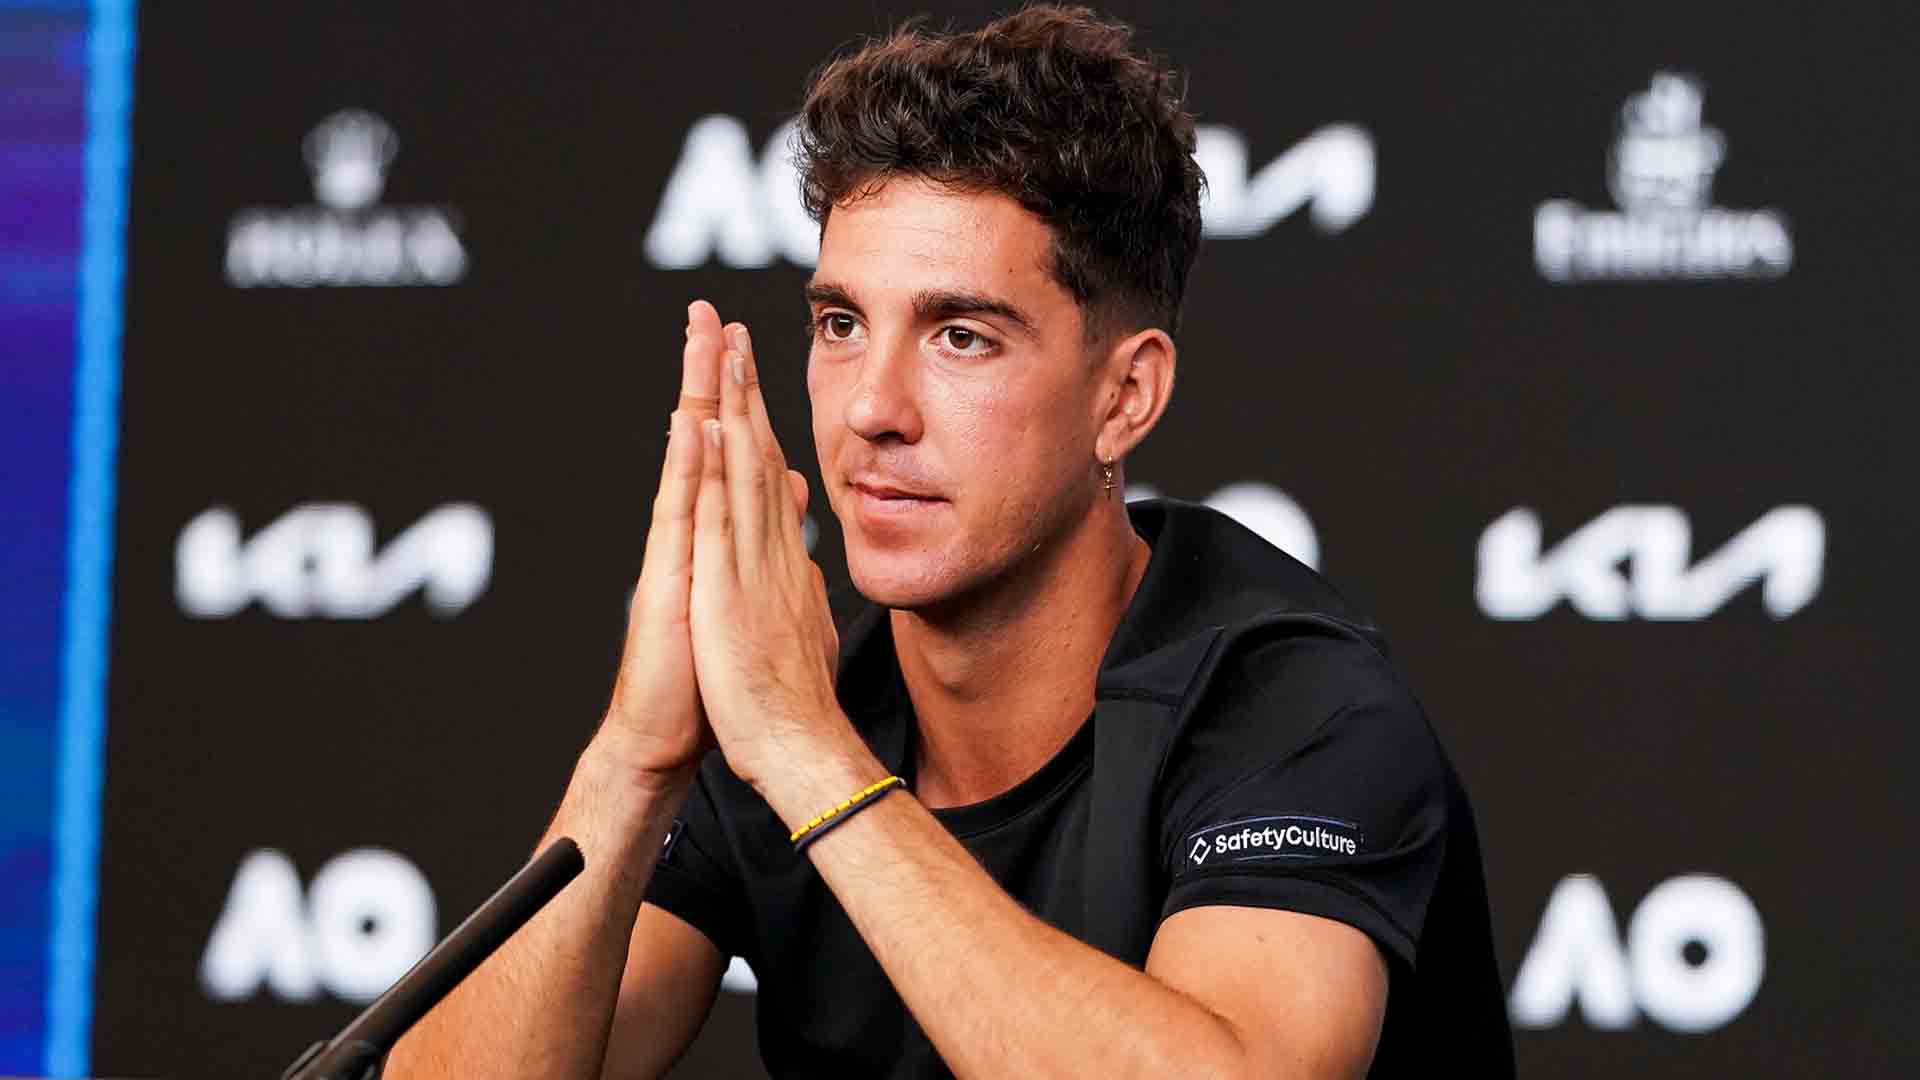 Thanasi Kokkinakis: 'Matches Like This Are Why I Keep Believing' - 2021